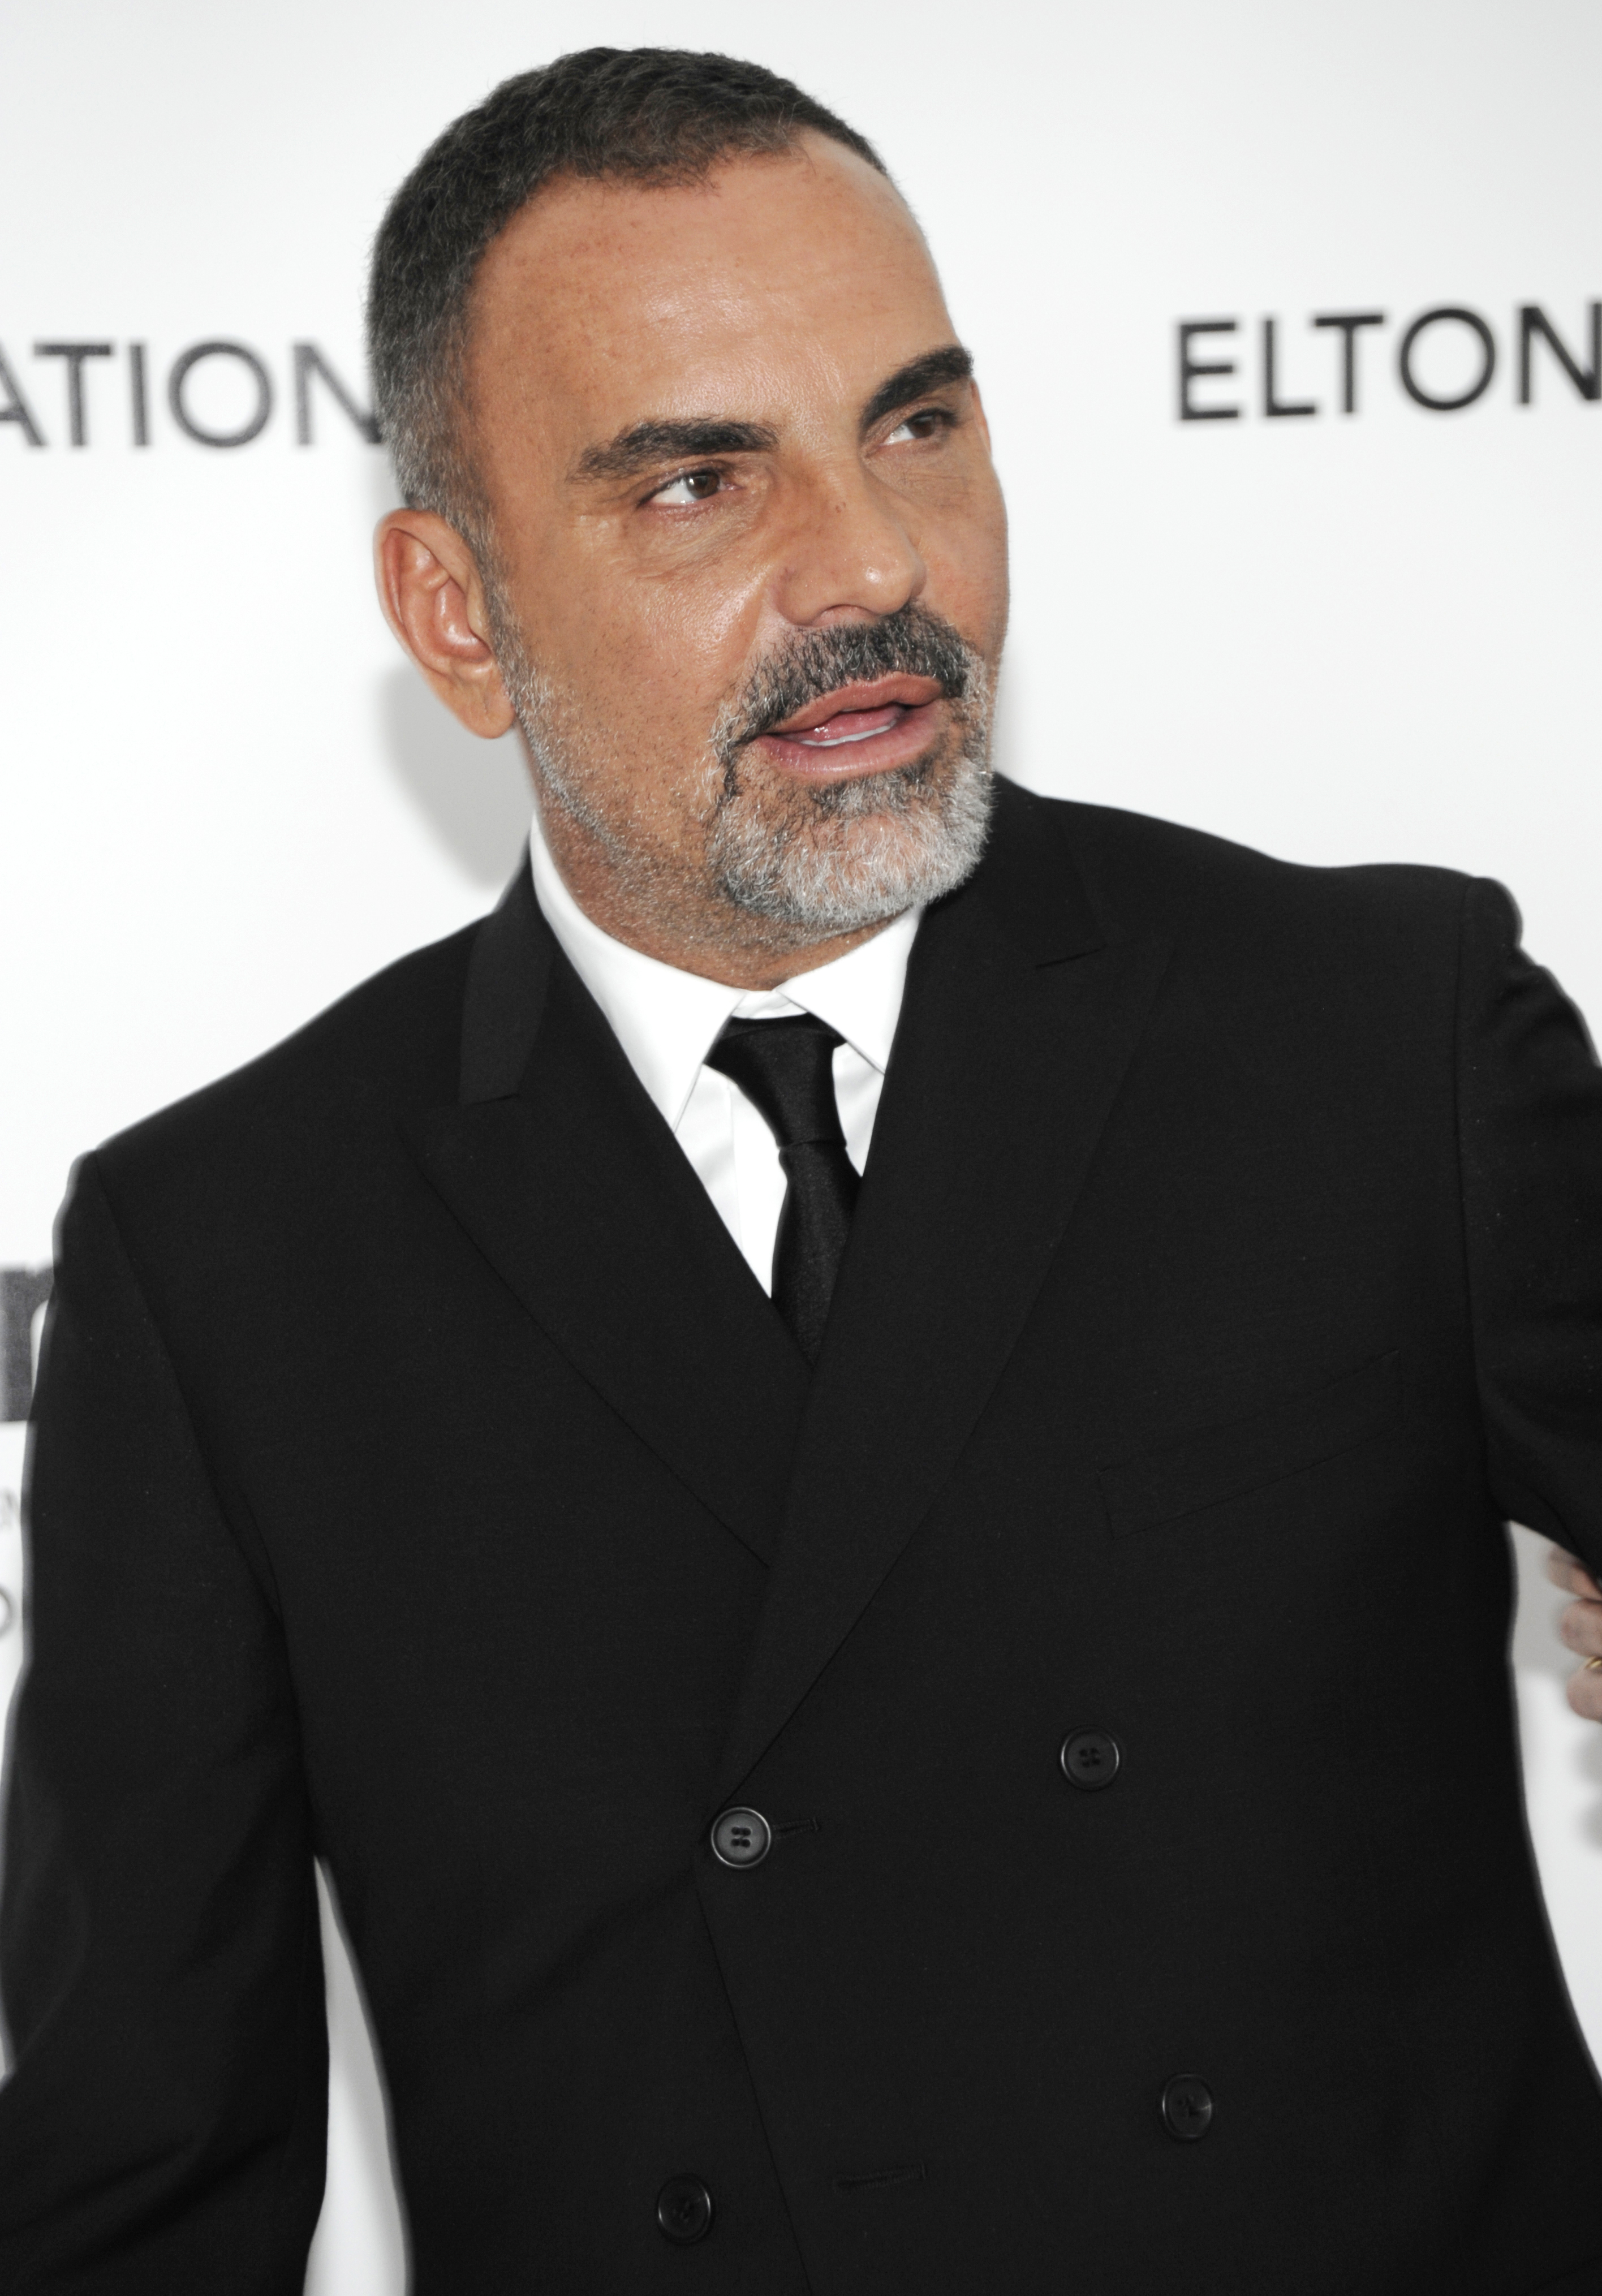 Christian Audigier at the Elton John AIDS Foundation Academy Awards viewing party in West Hollywood, Calif. on Feb. 26, 2012. (Dan Steinberg—AP)